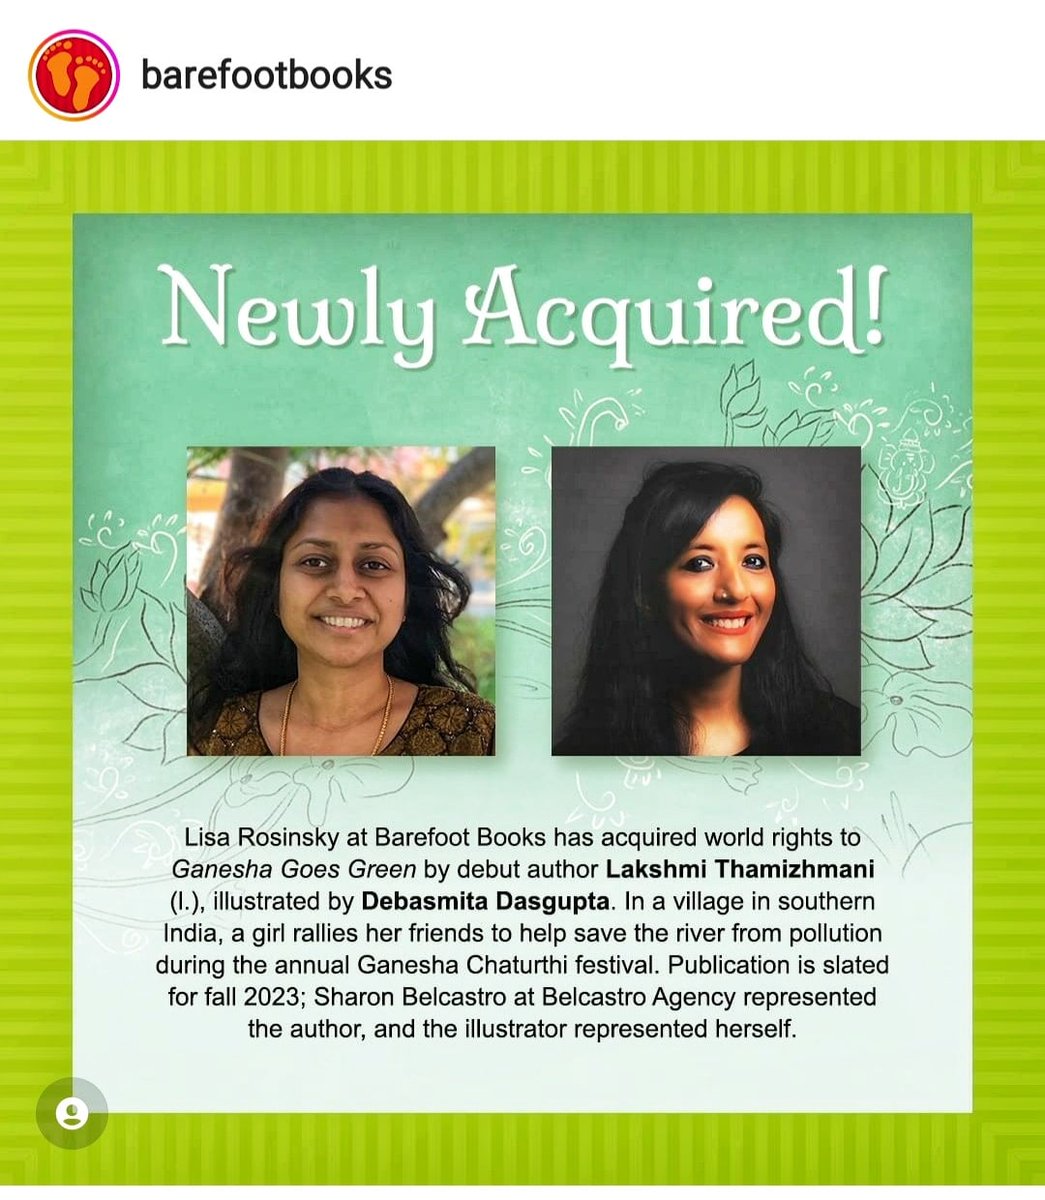 🌟Böök Deal🌟I'm over the moon to share this awesome deal announcement with all of you 🍀 Can't wait to take you to a happier greener world through my illustrations for #GaneshaGoesGreen with @BarefootBooks (hq Massachusetts, USA) & author Lakshmi Thamizhmani 🍀